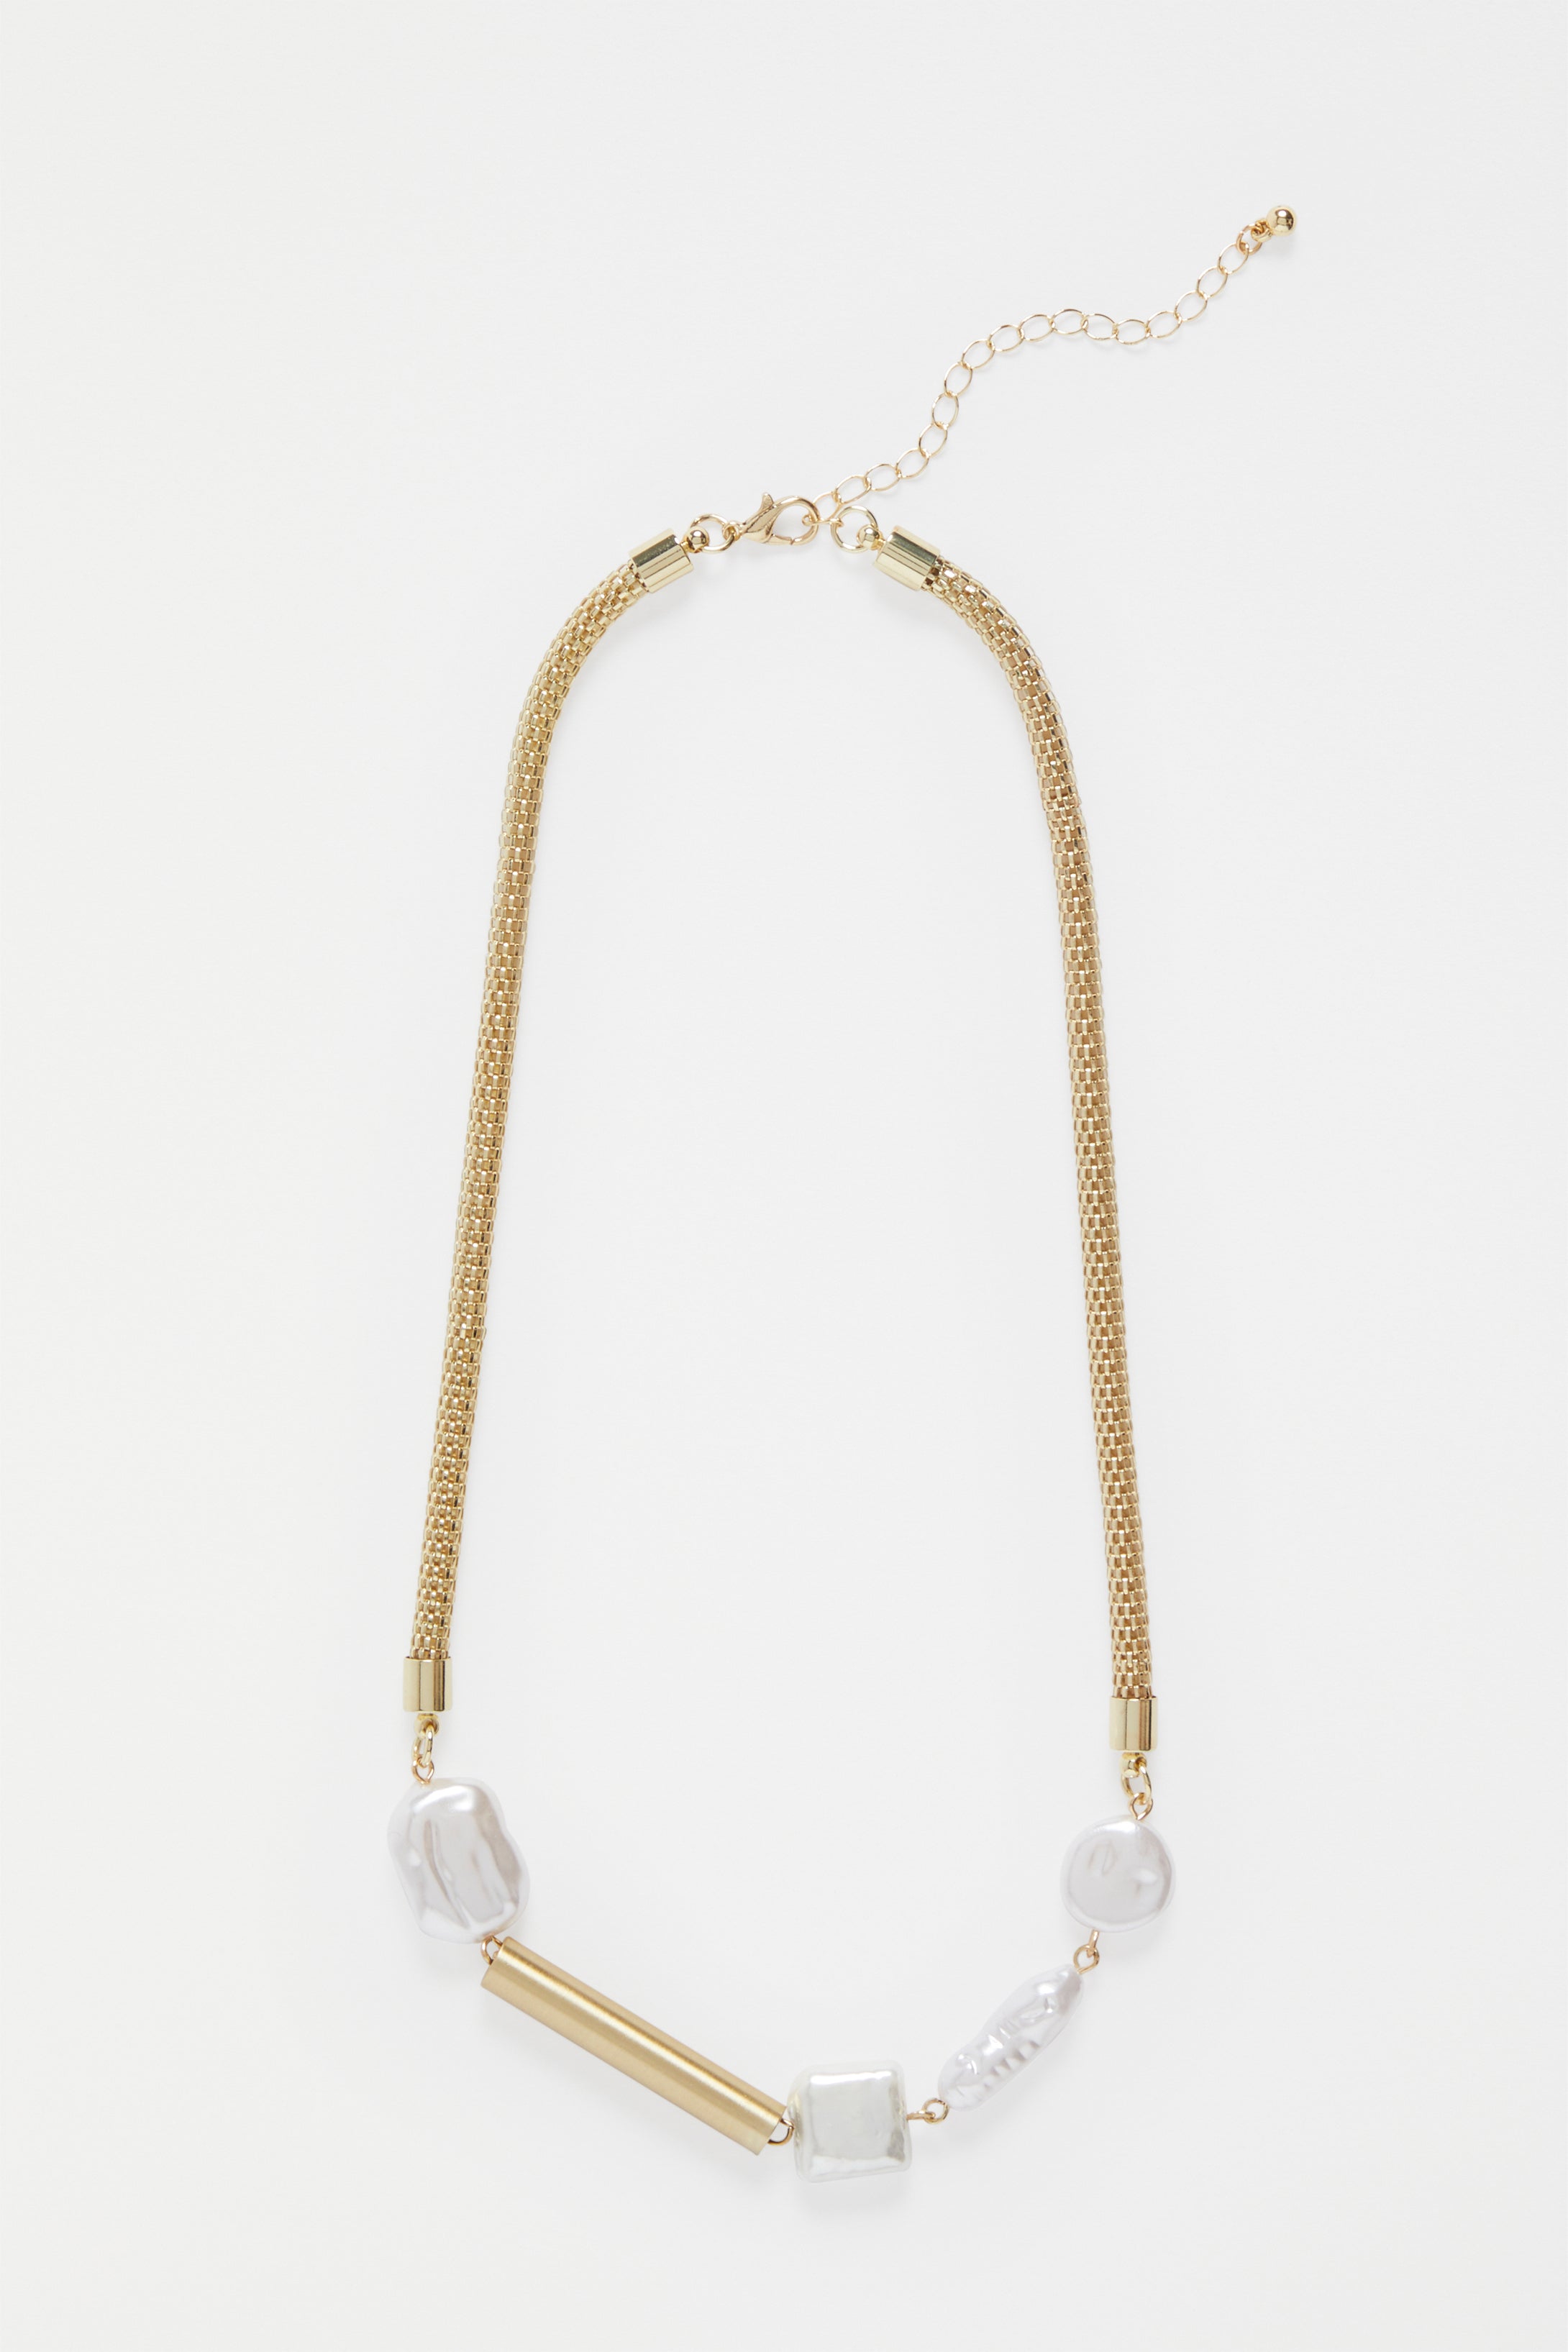 Lang Asymetric Gold and Pearl Statement Necklace | GOLD